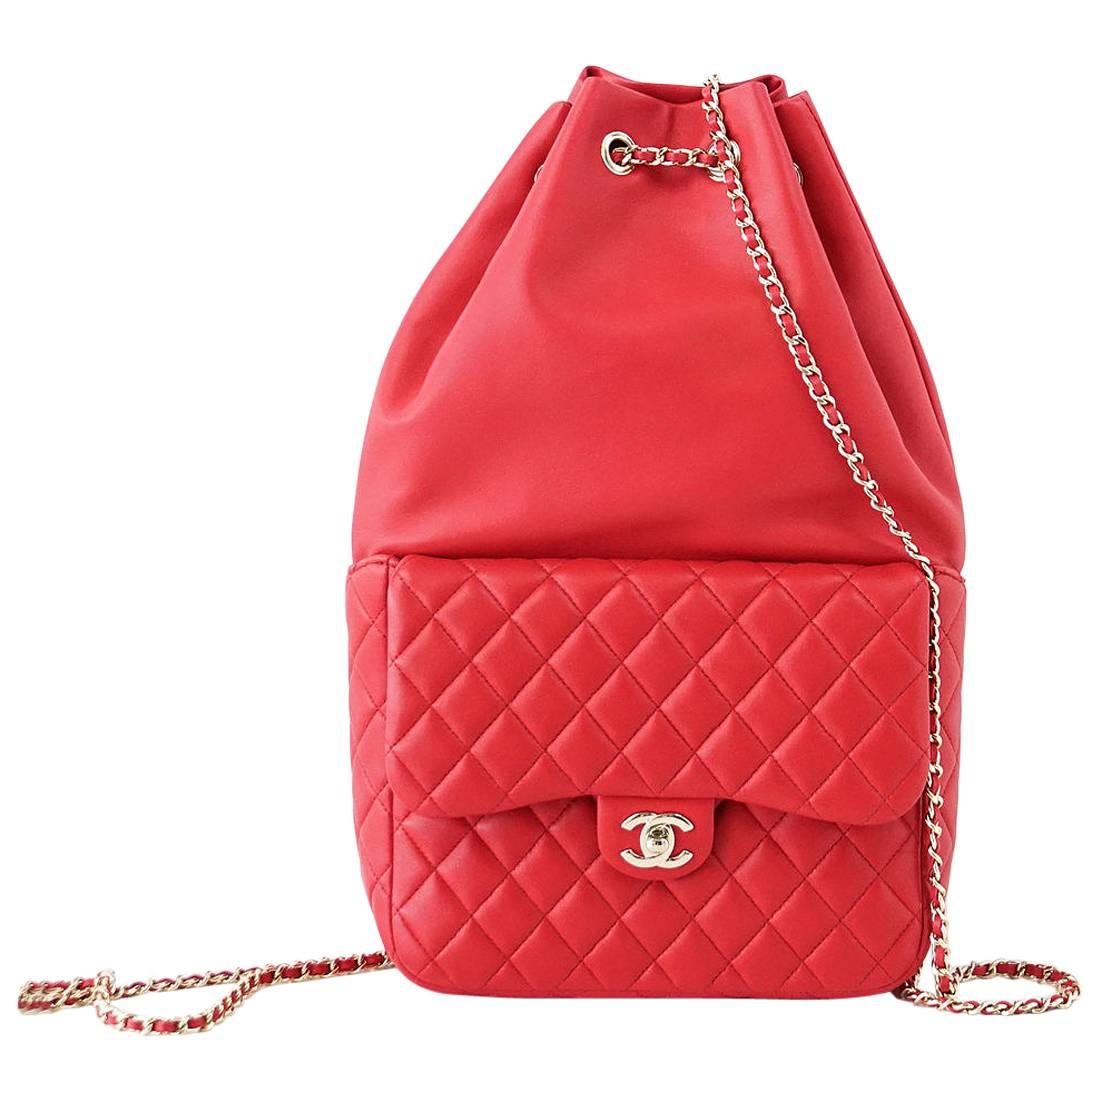 CHANEL Bag Red Classic Lambskin Backpack Rucksack CC Chain Quilted New